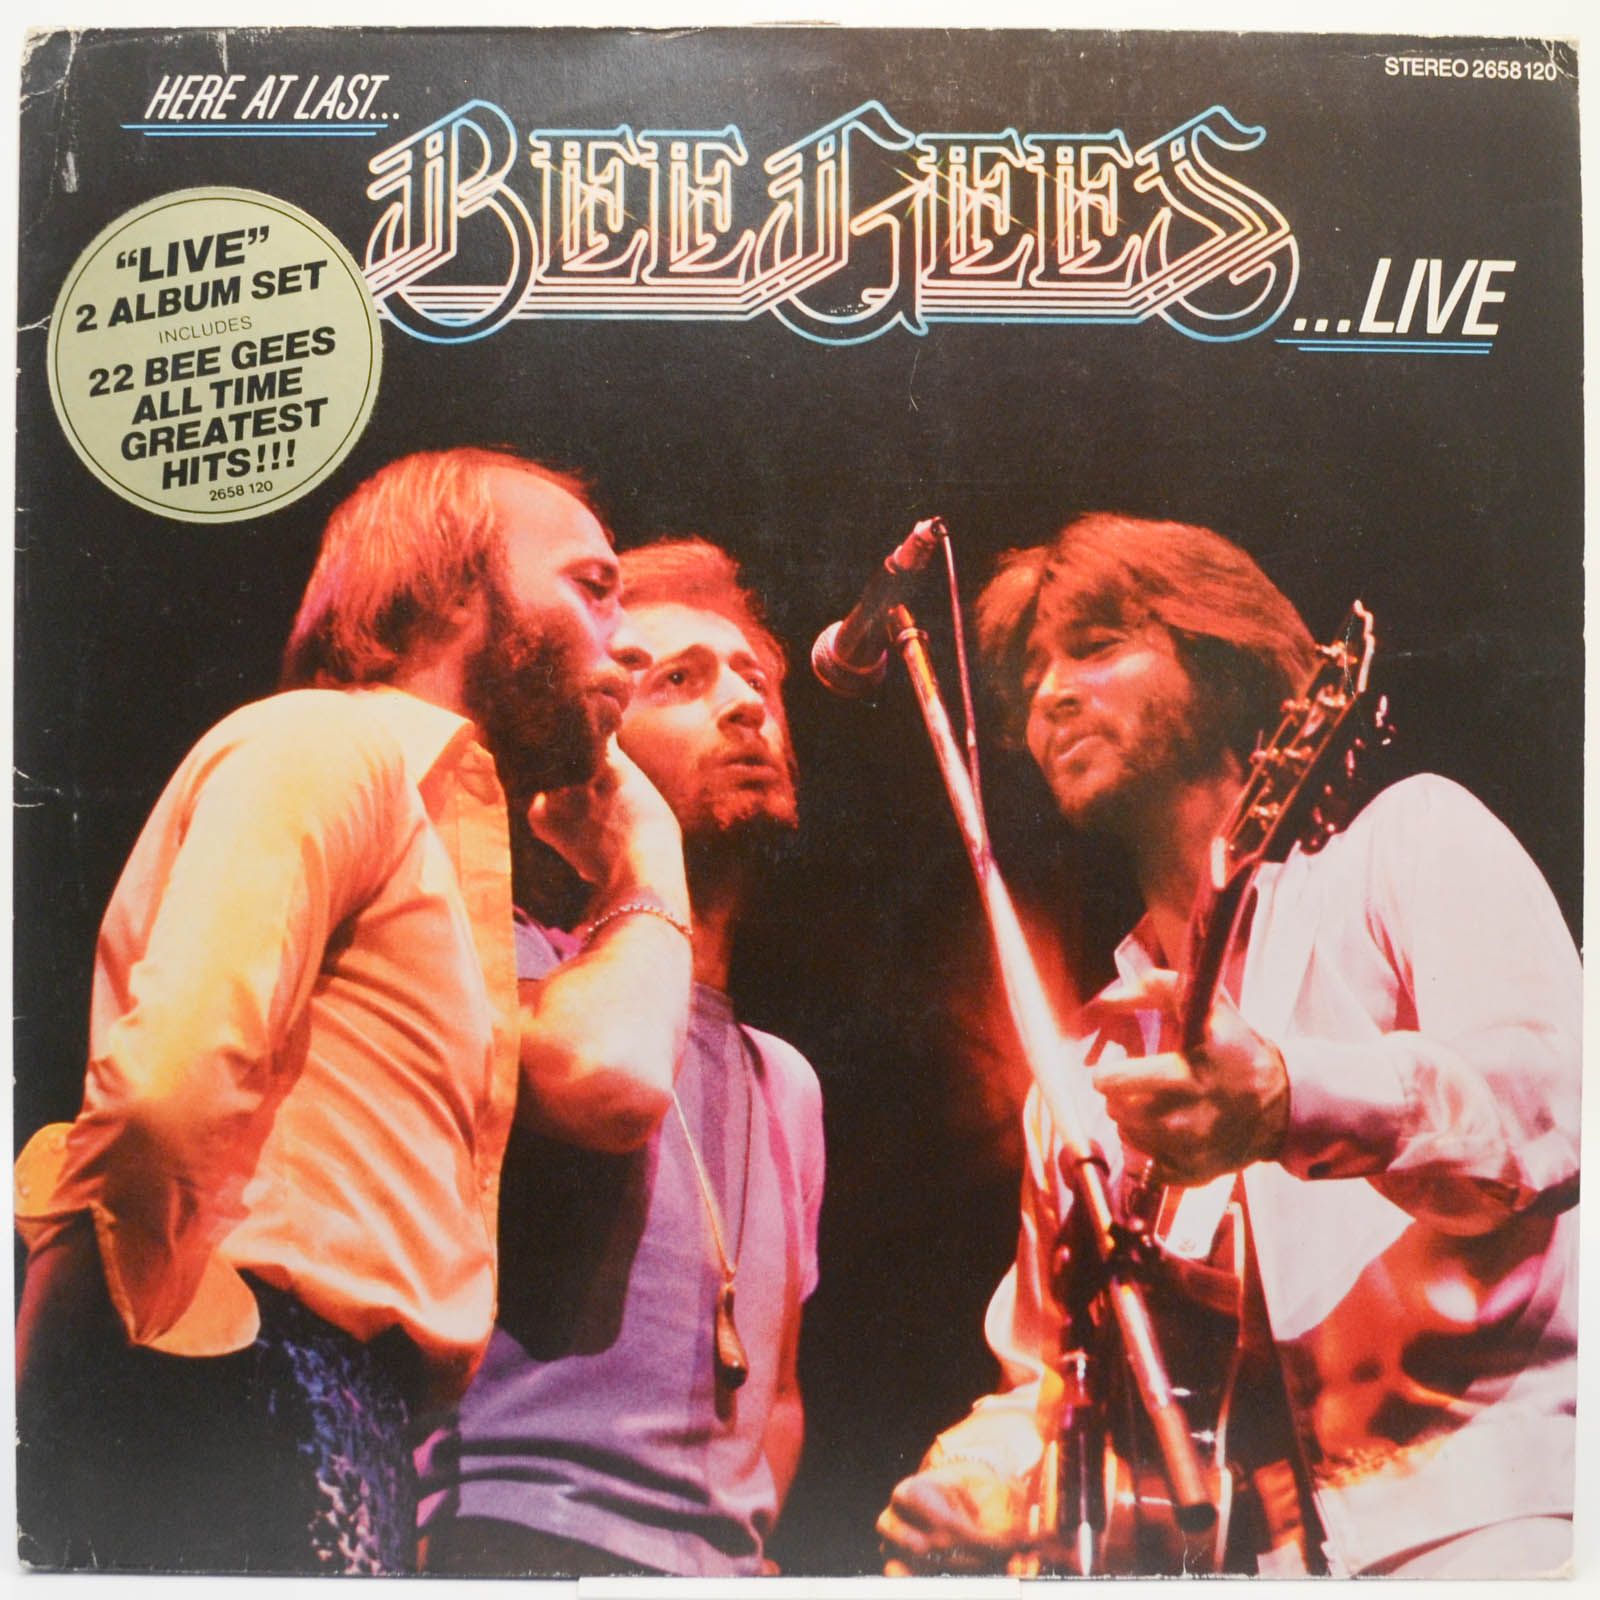 Bee Gees — Here At Last - Live (2LP), 1977